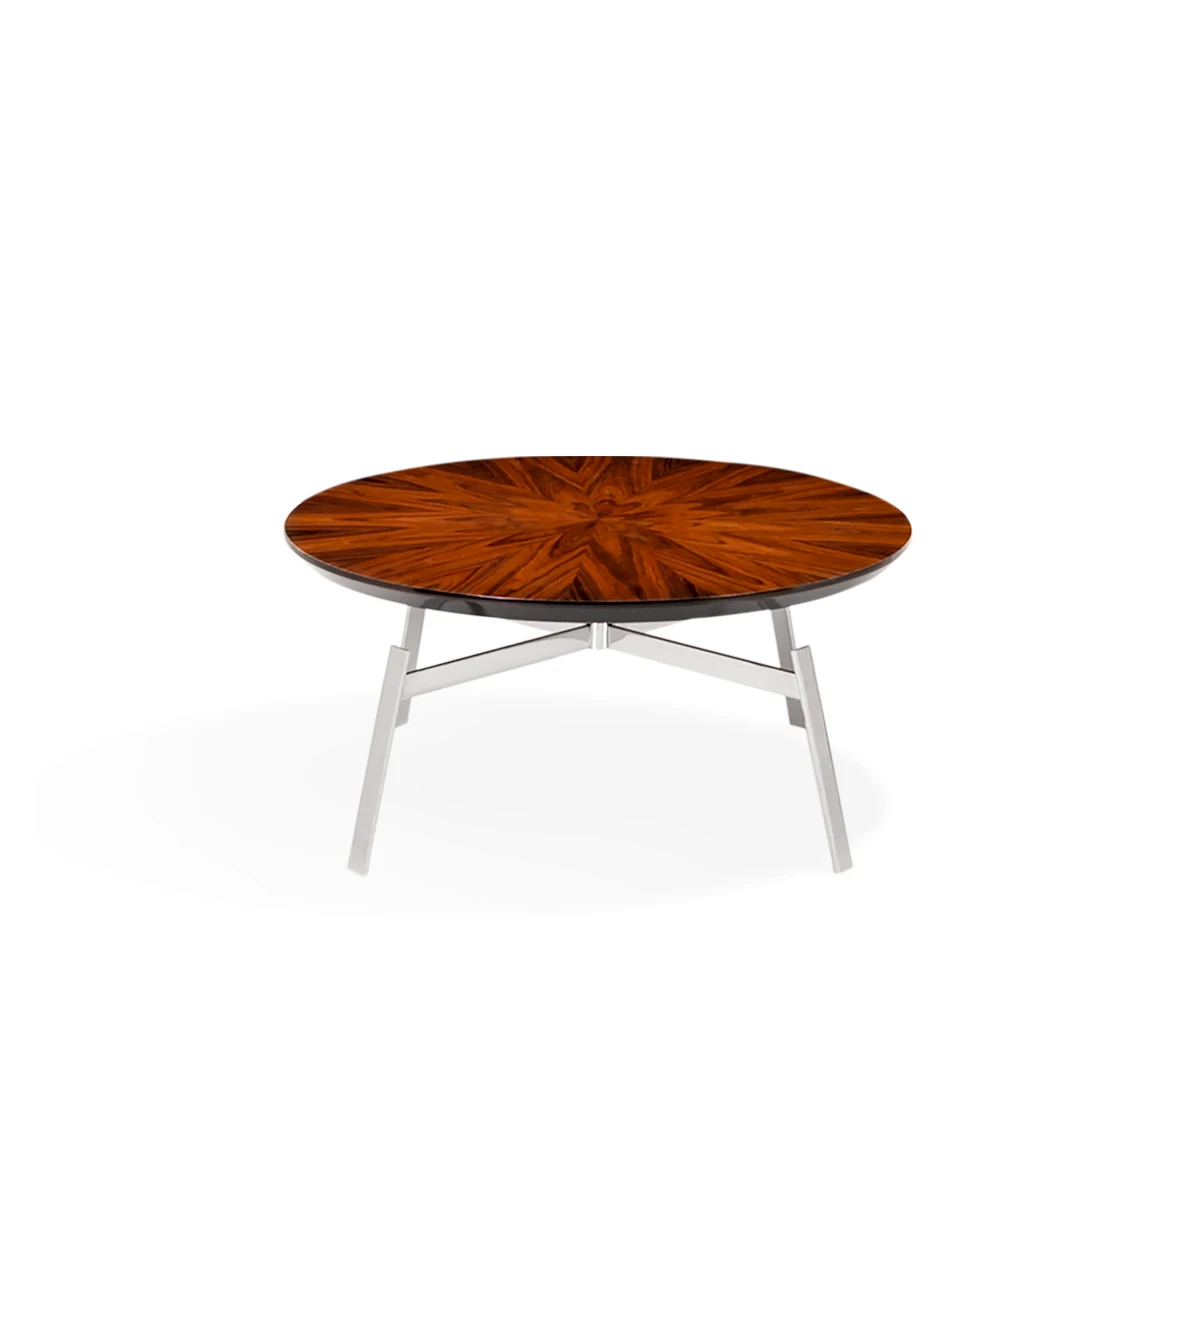 Tokyo round center table, high gloss palissander top and stainless steel feet, Ø 100 cm.